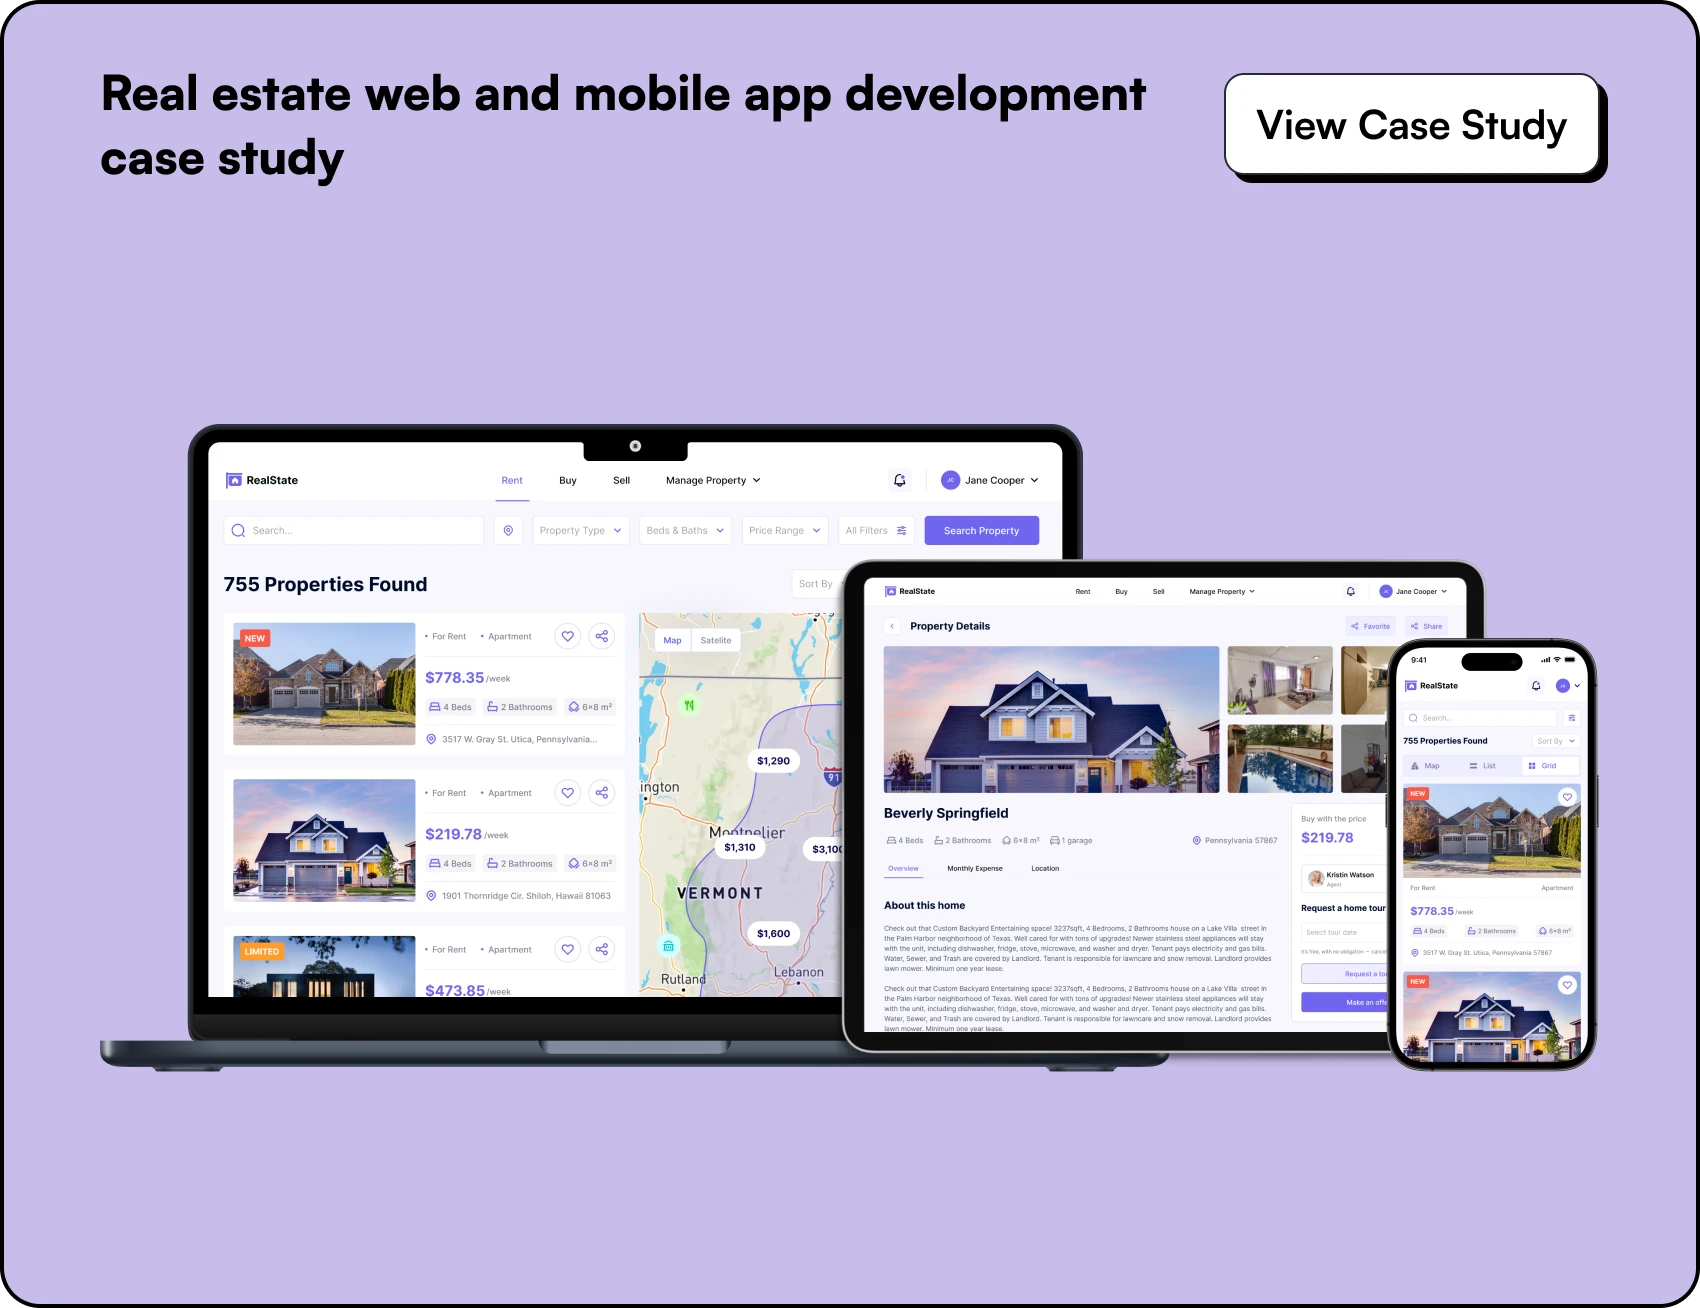 Real estate web and mobile app development case study